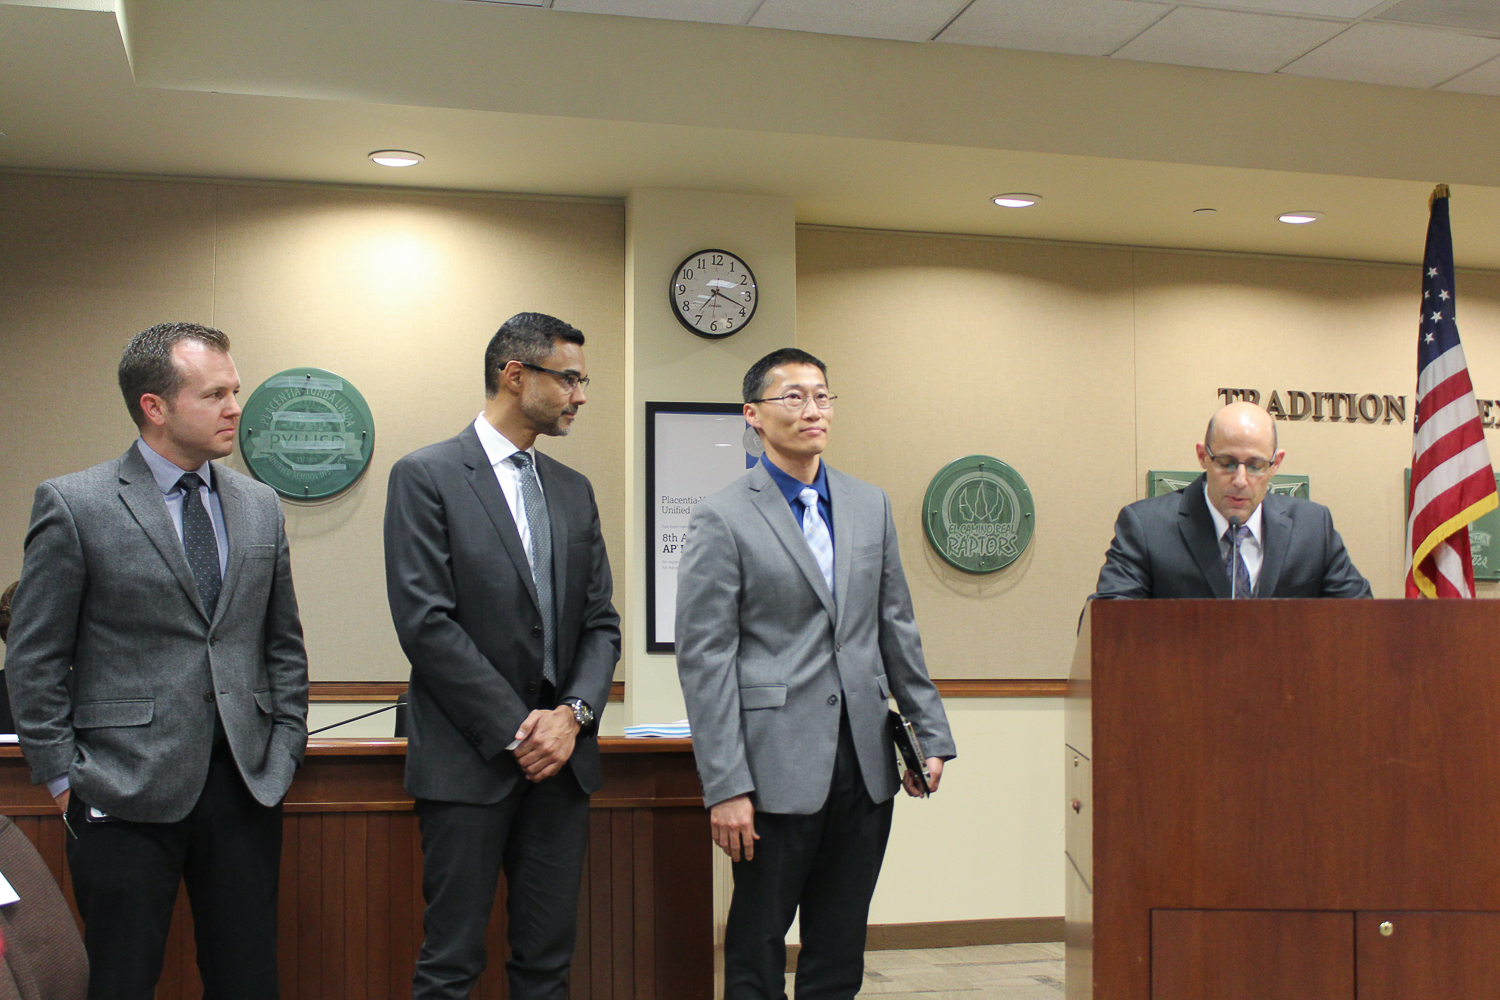 anaheim-public-utilities-presented-you-are-the-advantage-award-for